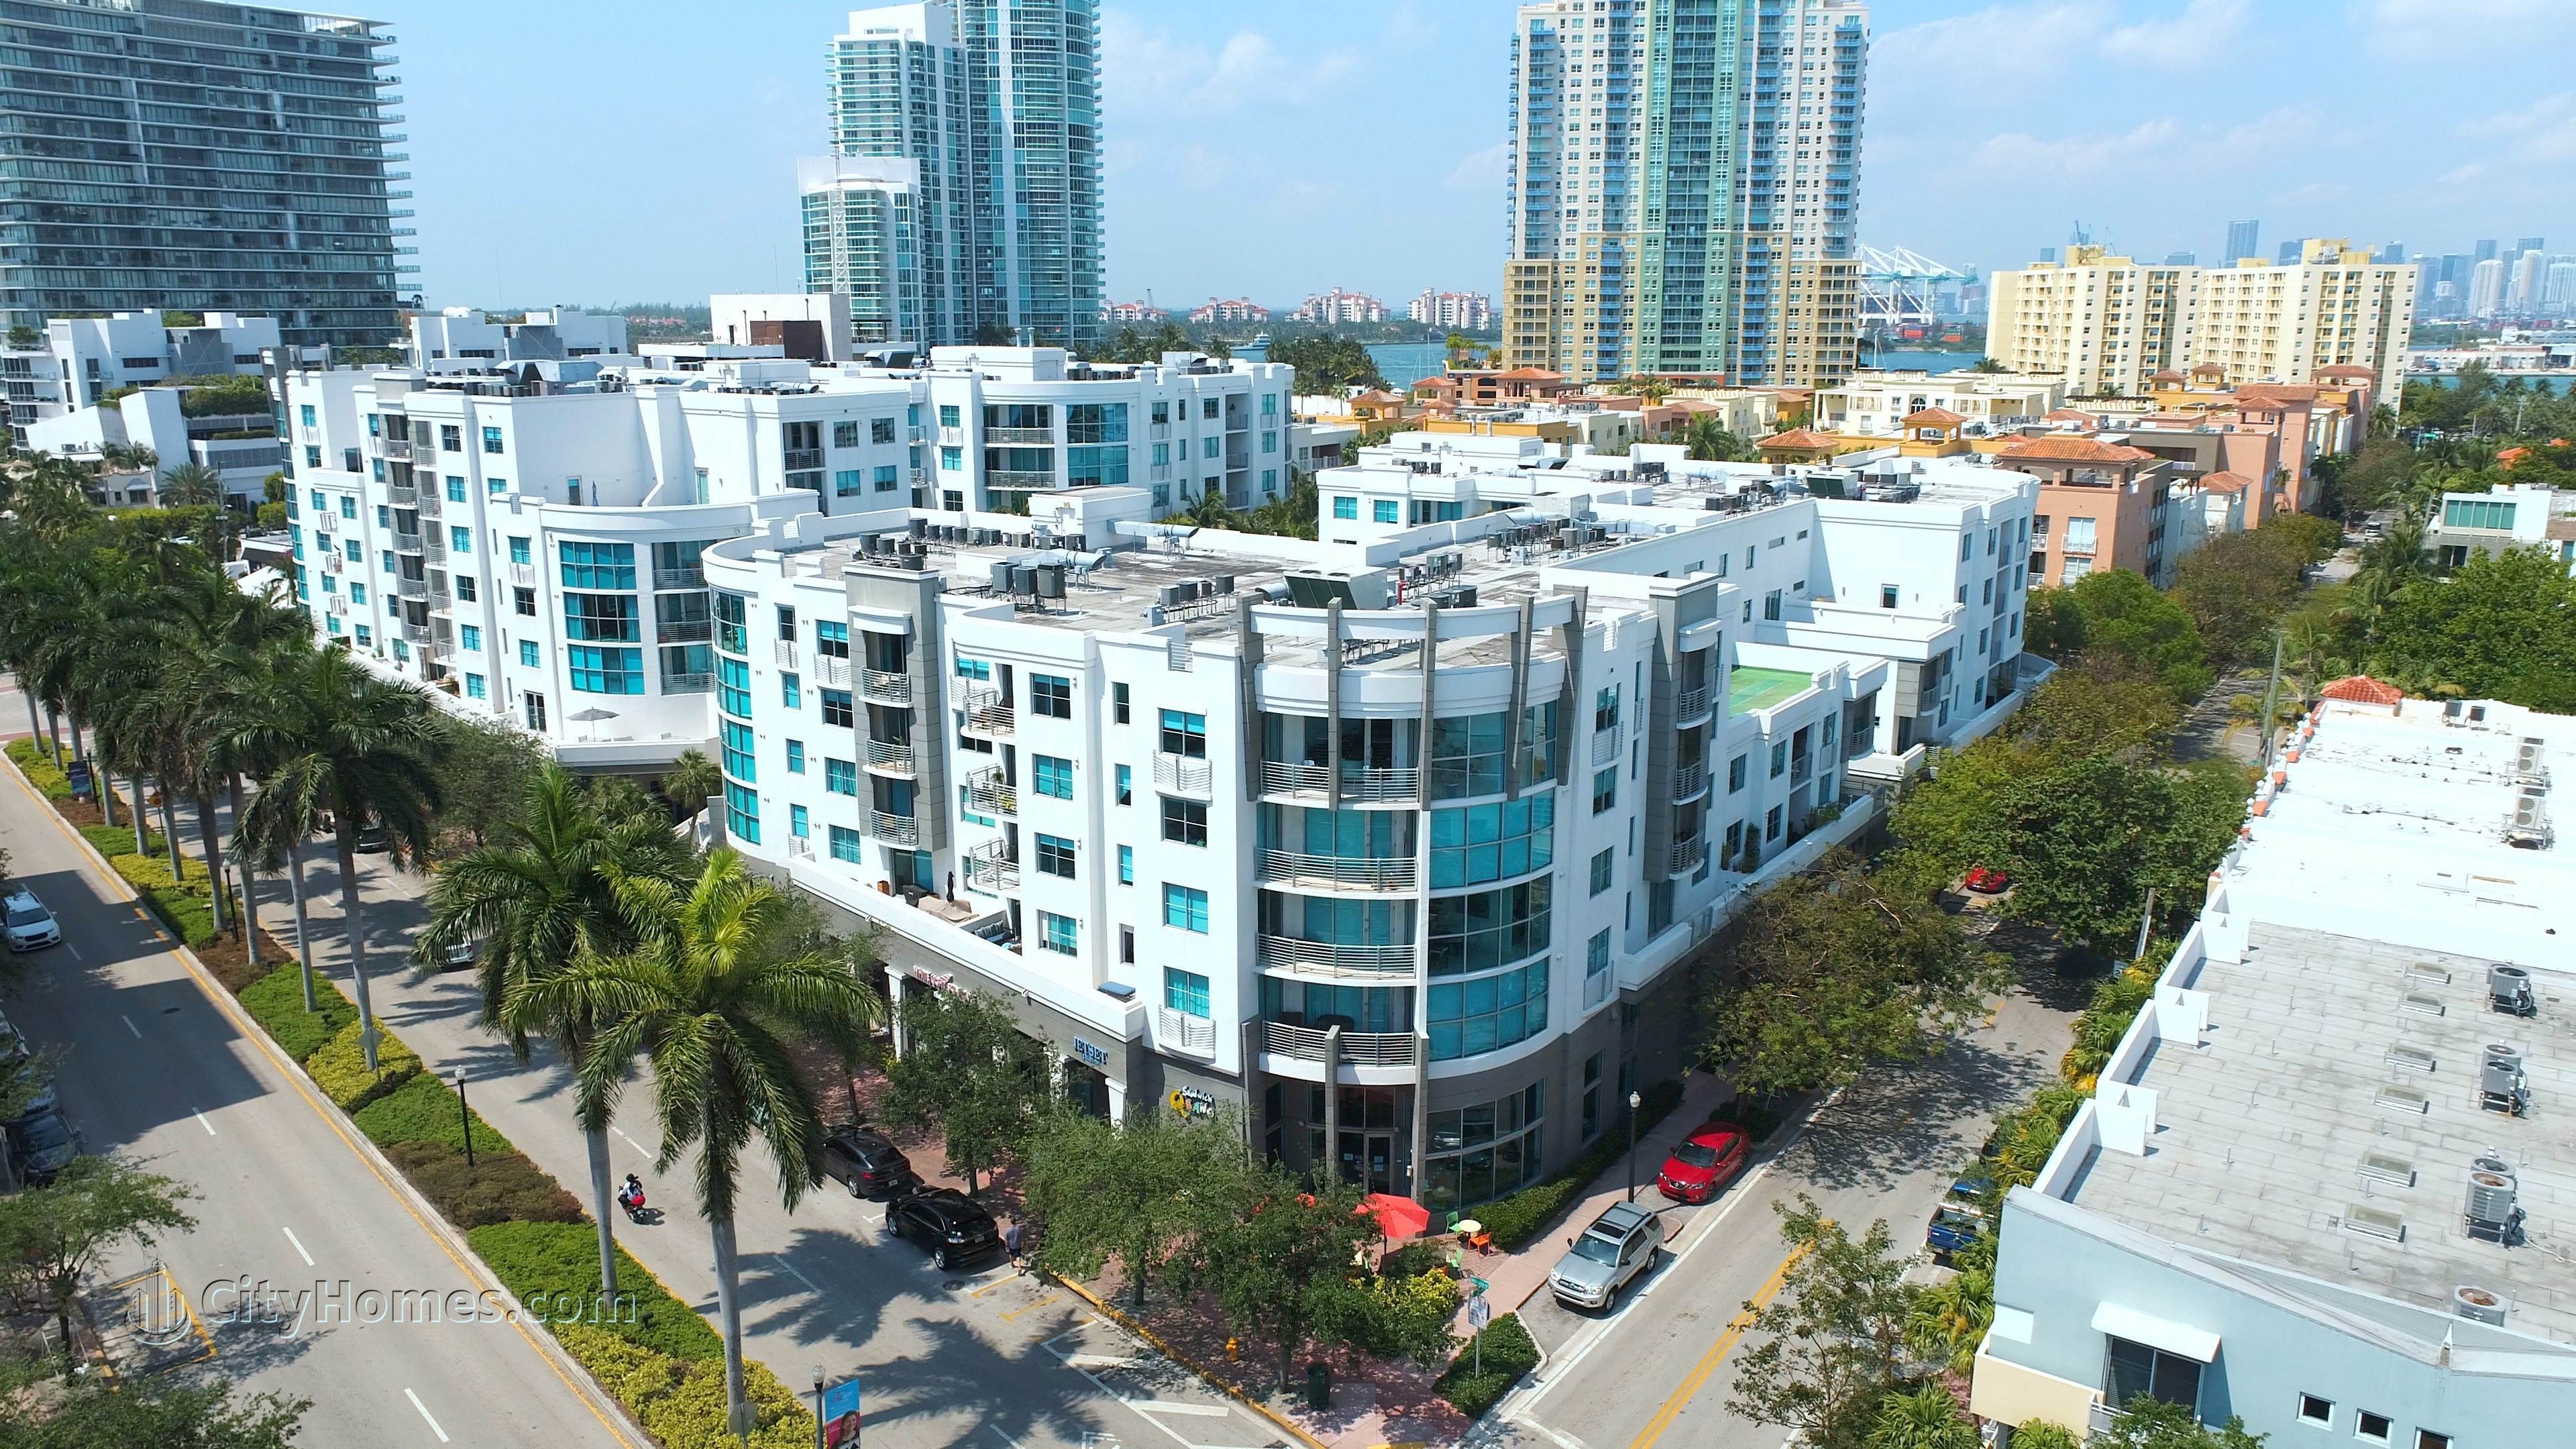 COSMOPOLITAN TOWERS building at 110 Washington Ave, South of Fifth, Miami Beach, FL 33139